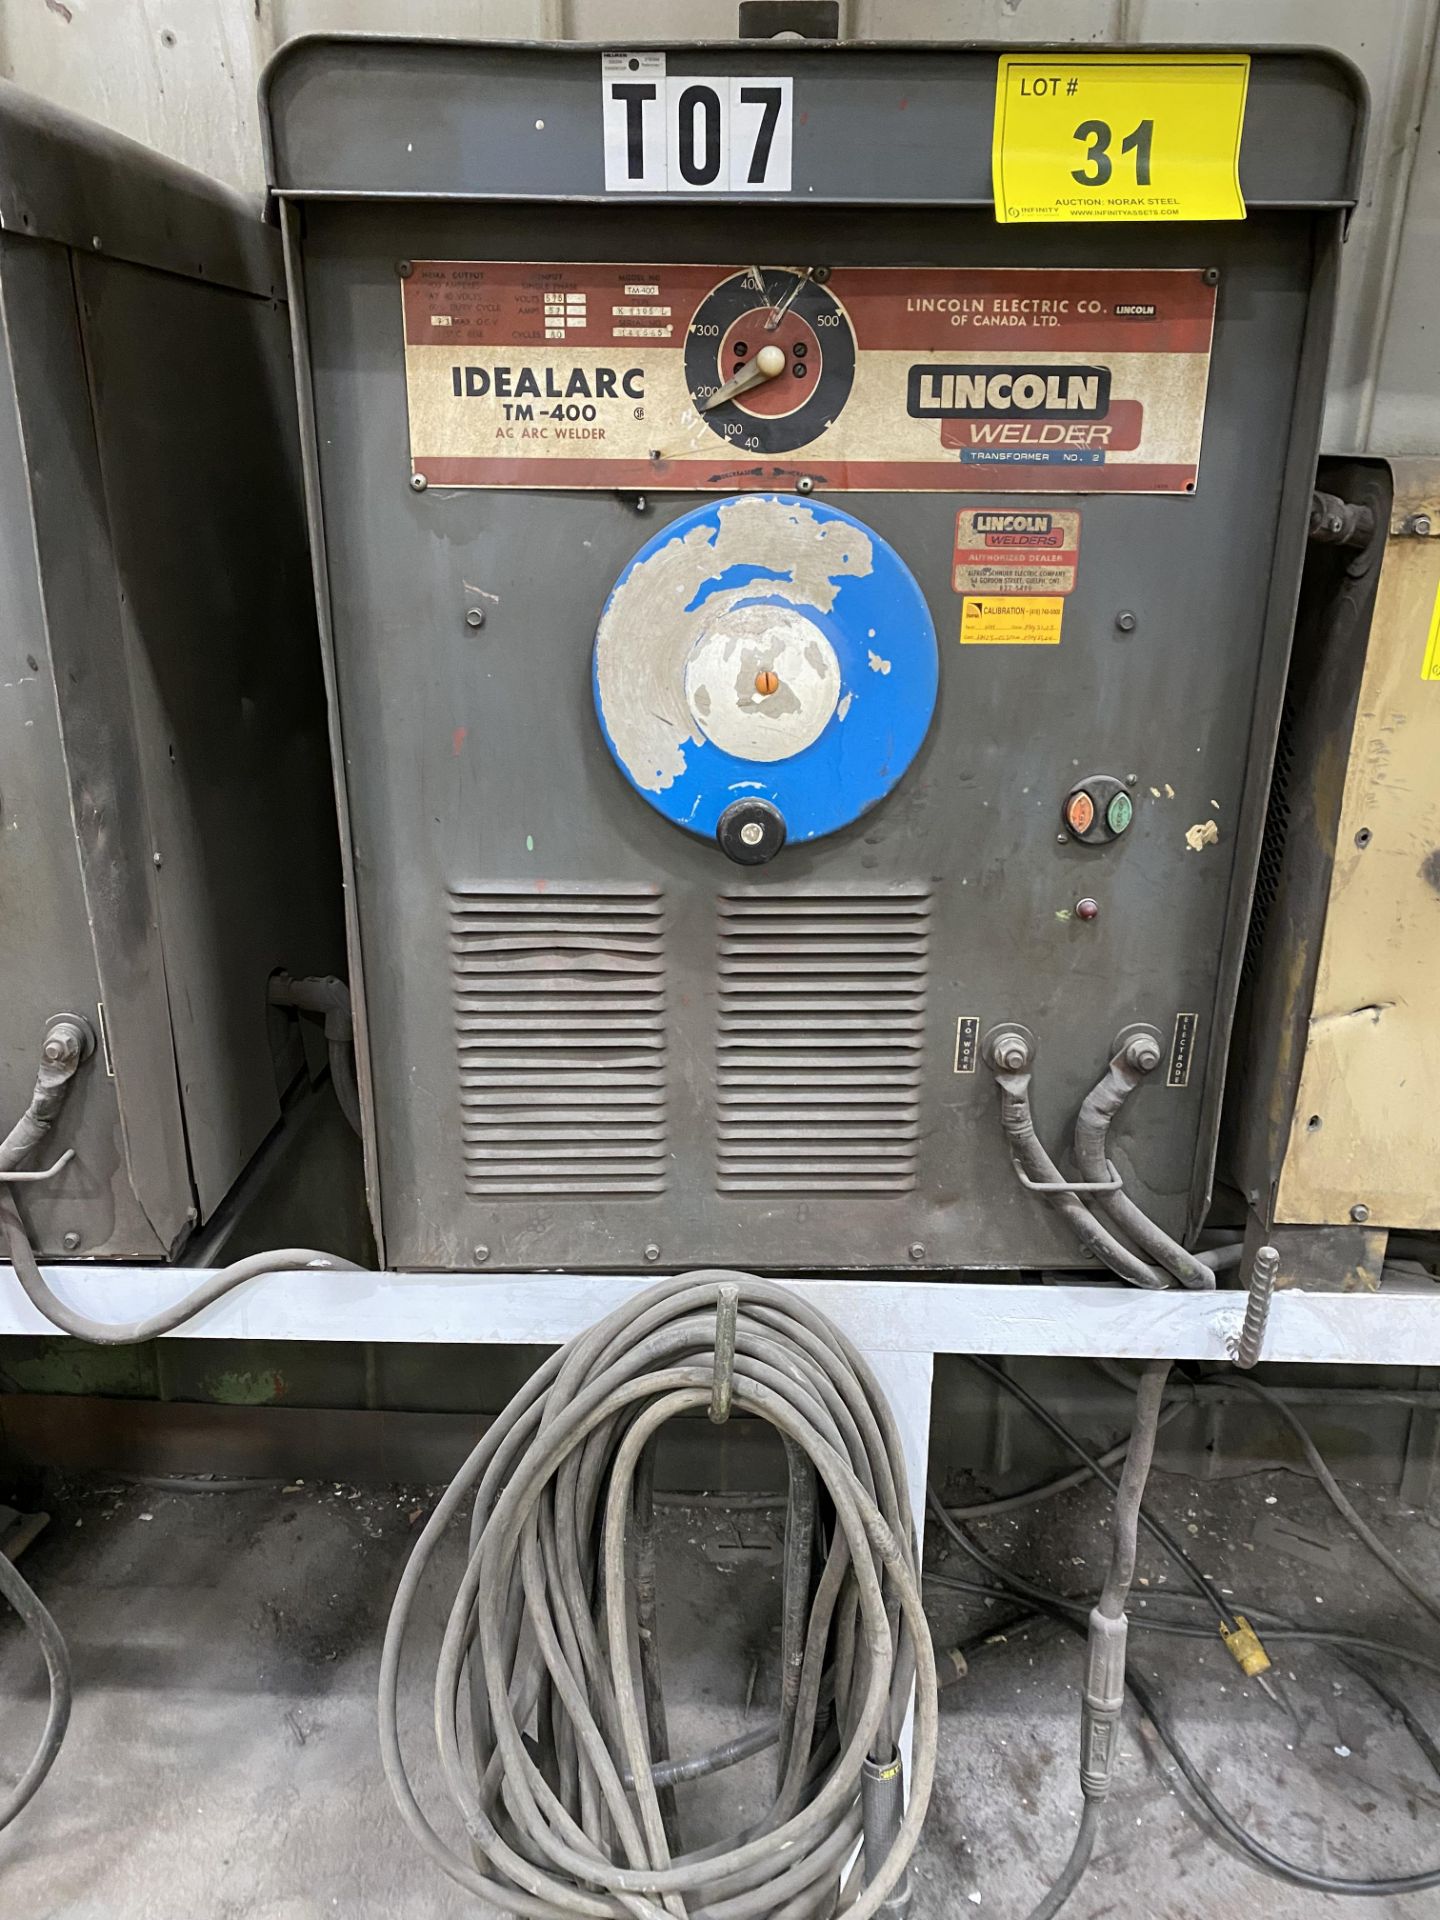 LINCOLN ELECTRIC IDEALARC TM-400 WELDER W/ CABLES (NO STAND)